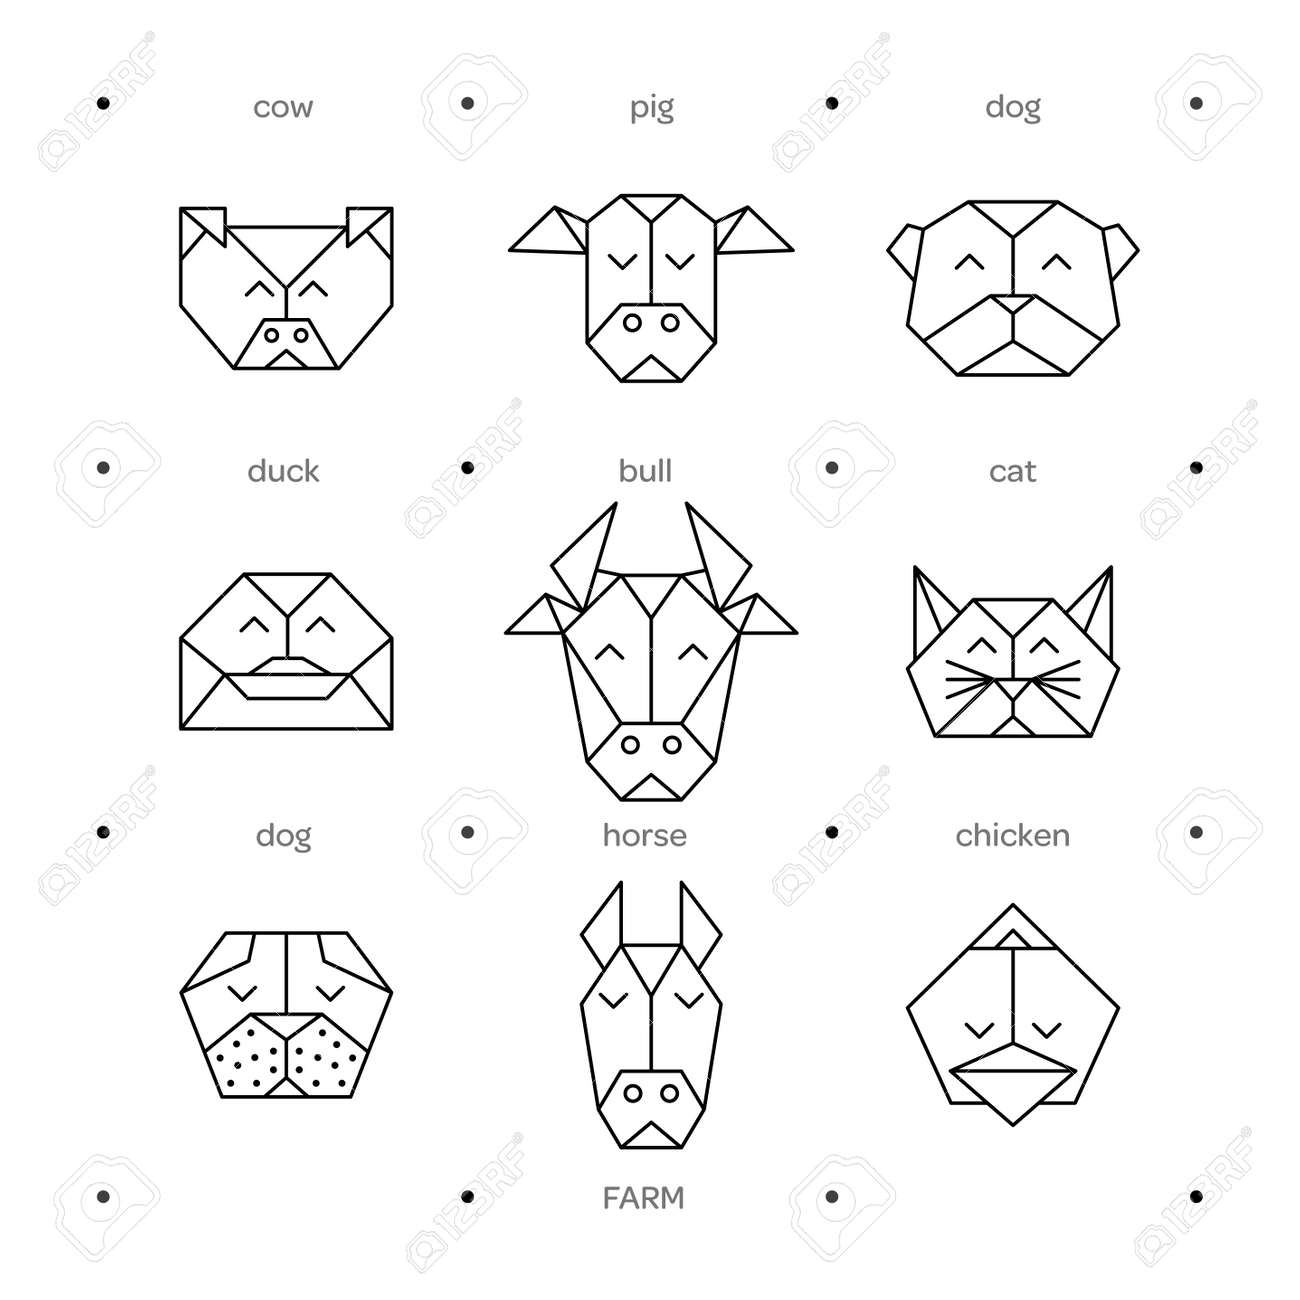 Origami vector animals set animal triangle heads vector origami animals geometric line design icon set vector origami animals for tattoo or coloring book vector origami farm animals collection royalty free svg cliparts